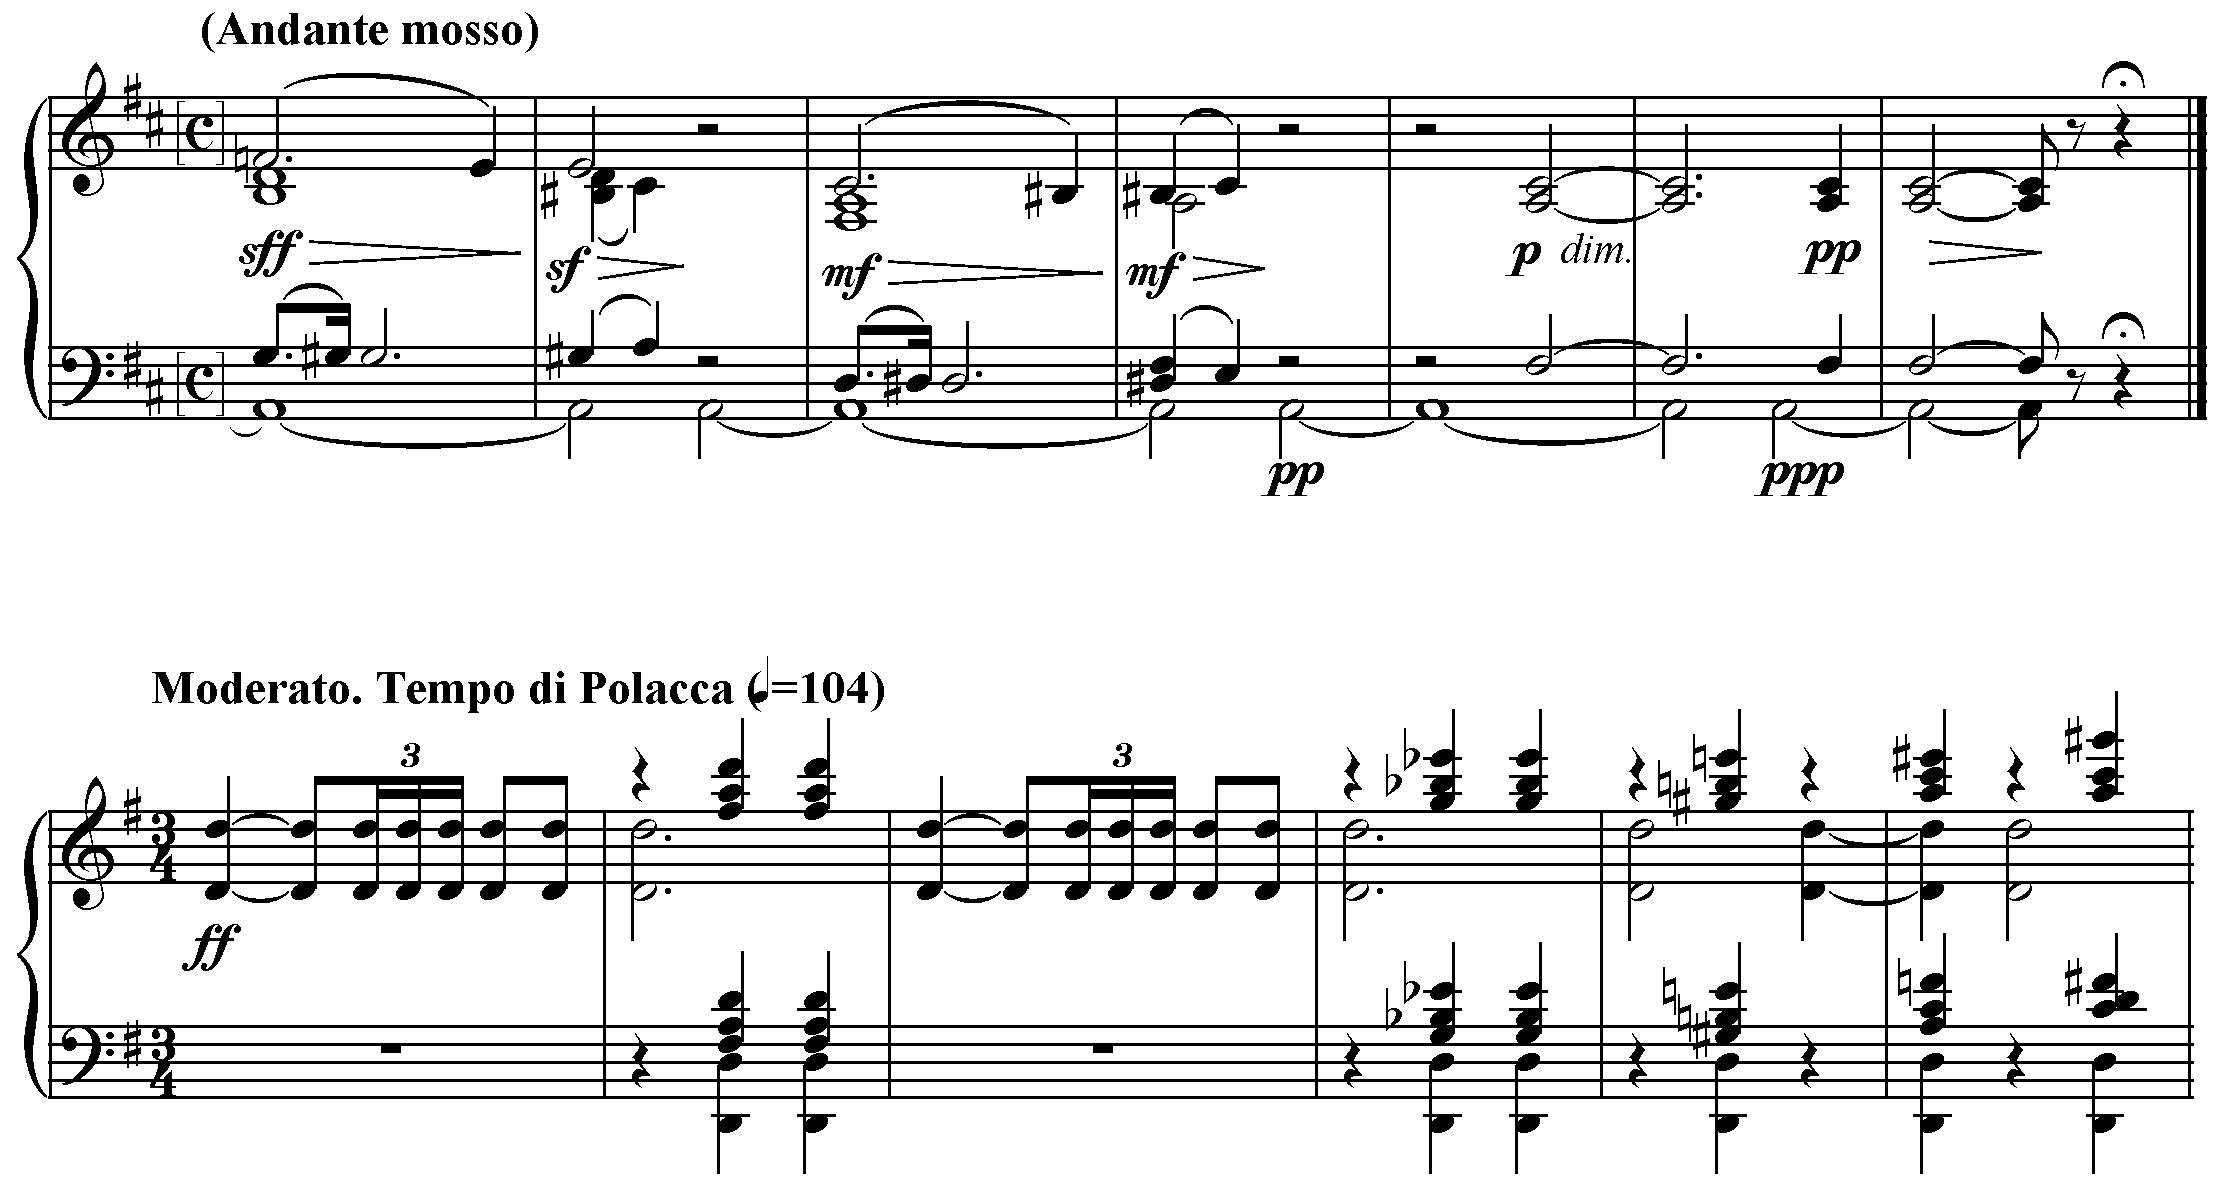 The final measures of Tchaikovsky's Overture to "The Queen of Spades" followed by the opening measures of the Polonaise from "Eugene Onegin."